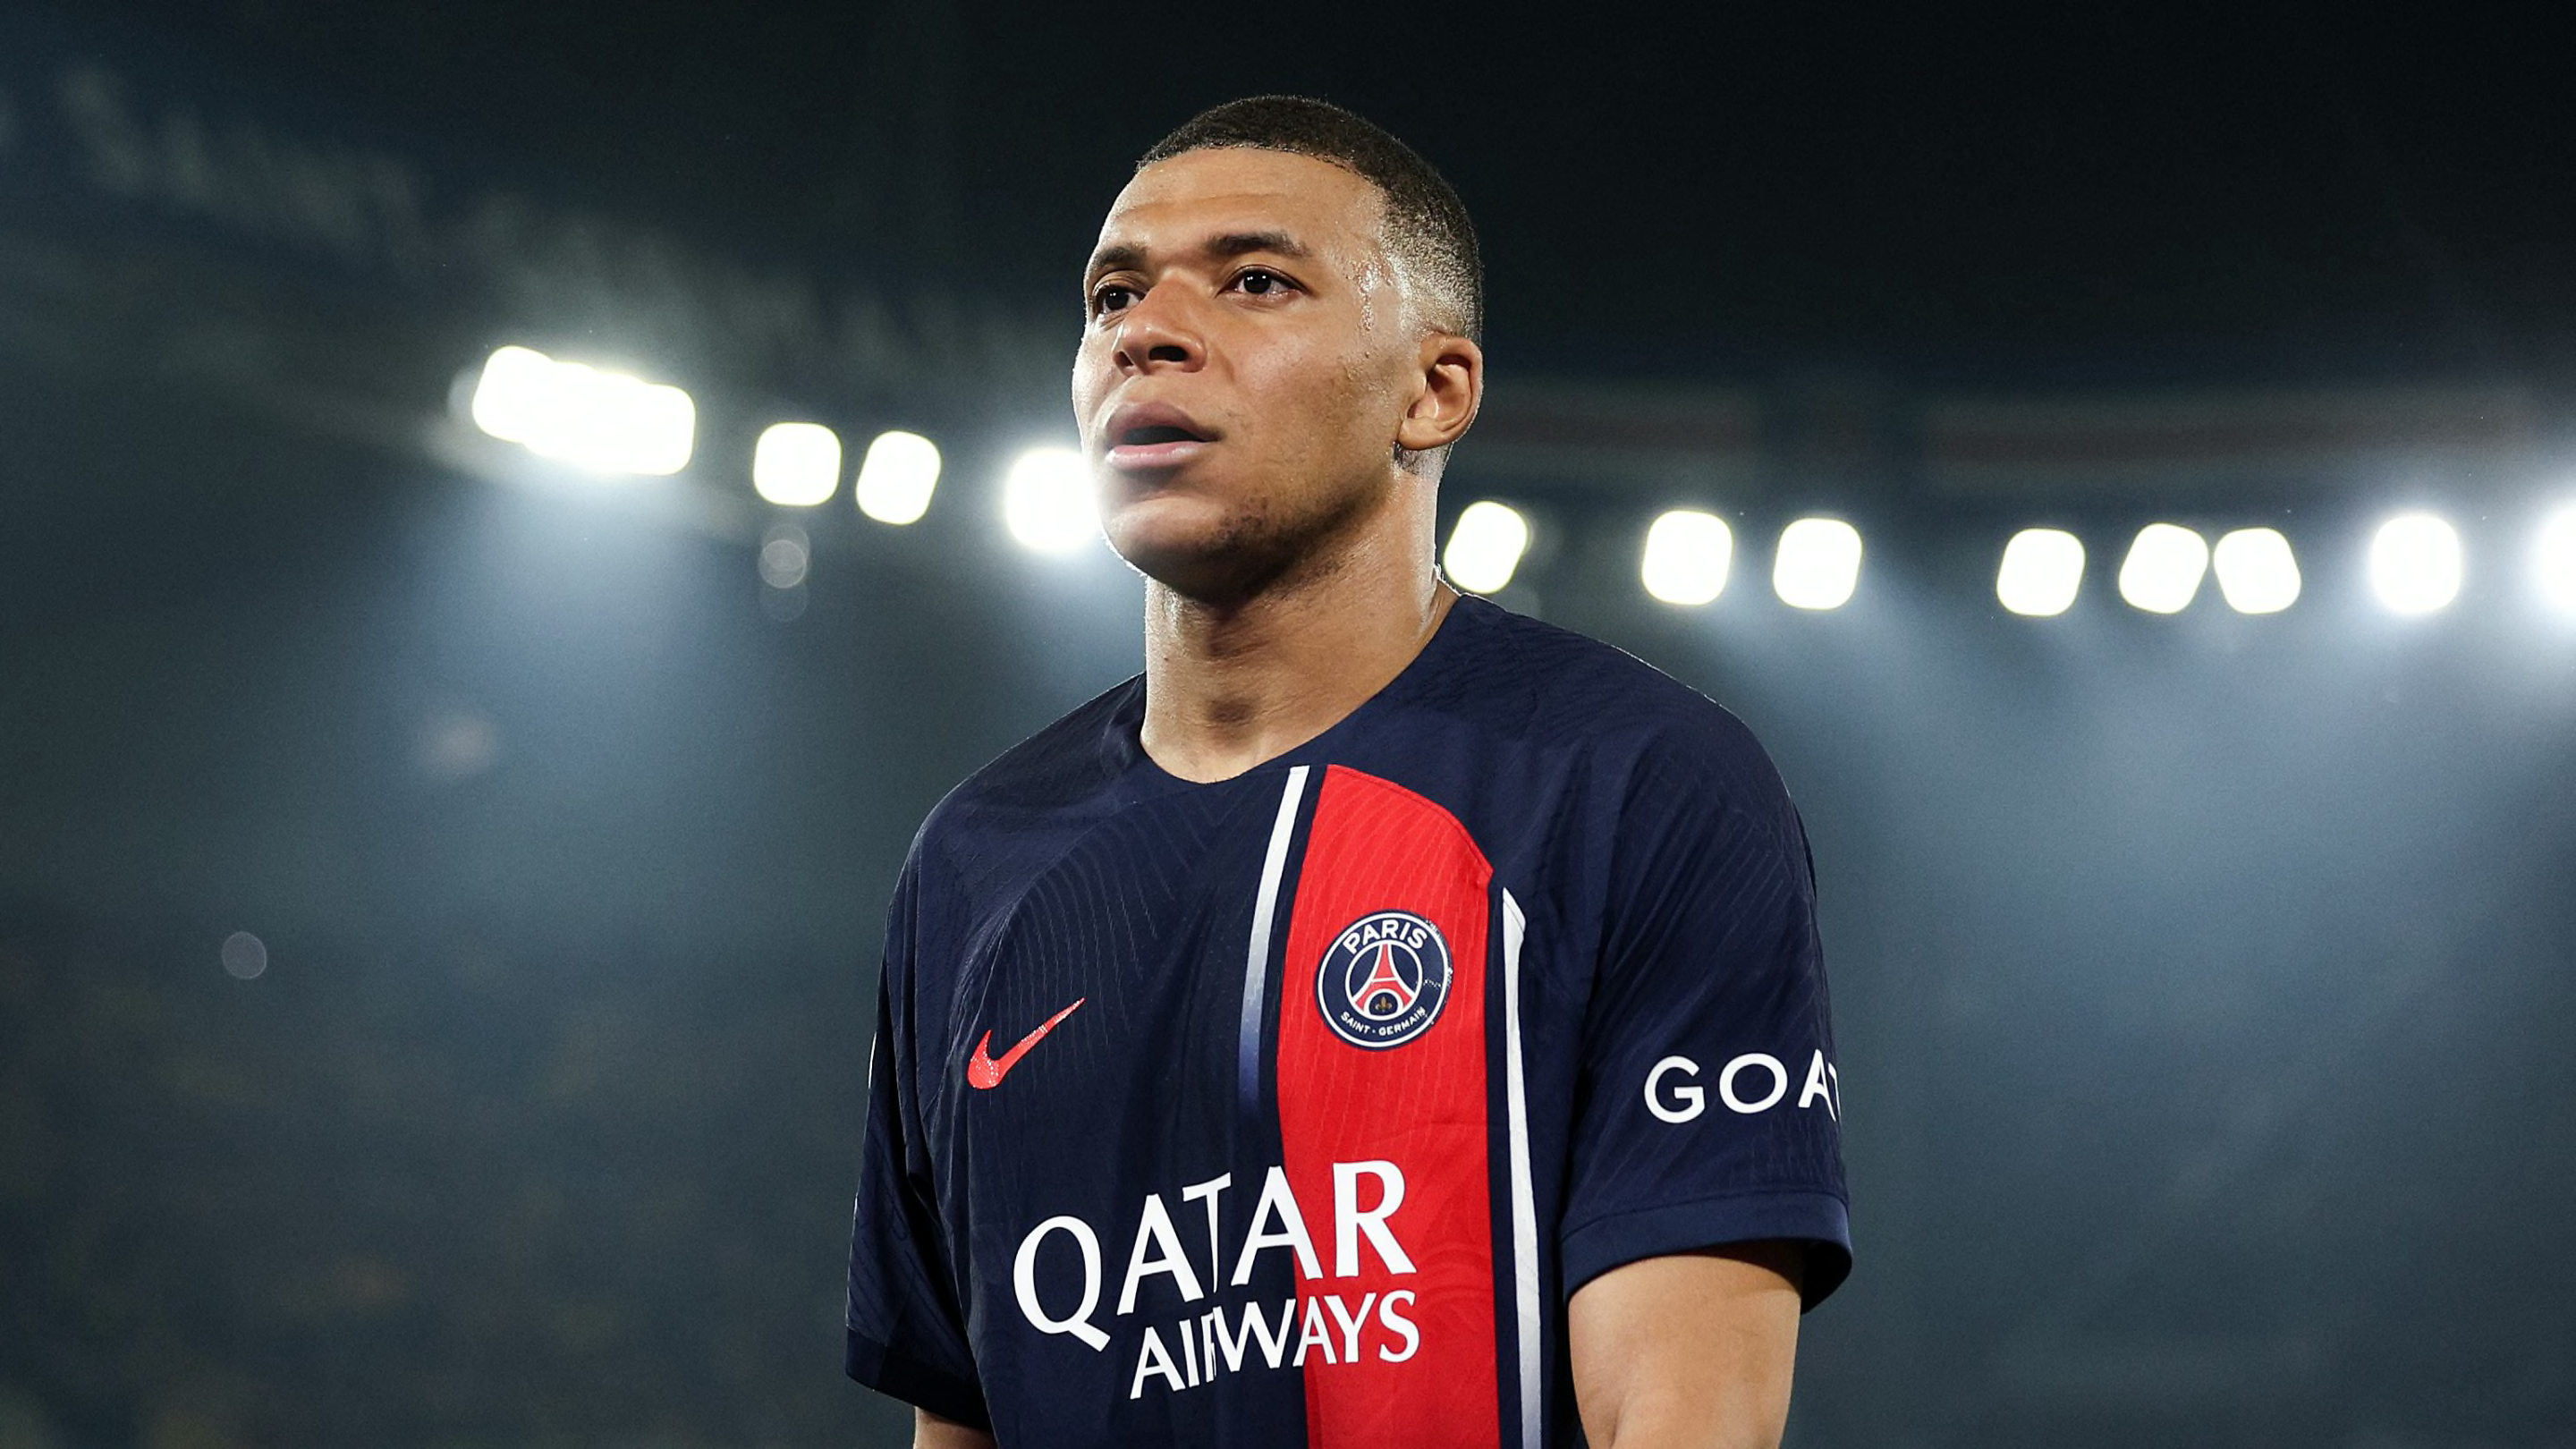 Kylian Mbappe confirms summer transfer decision in emotional social media video